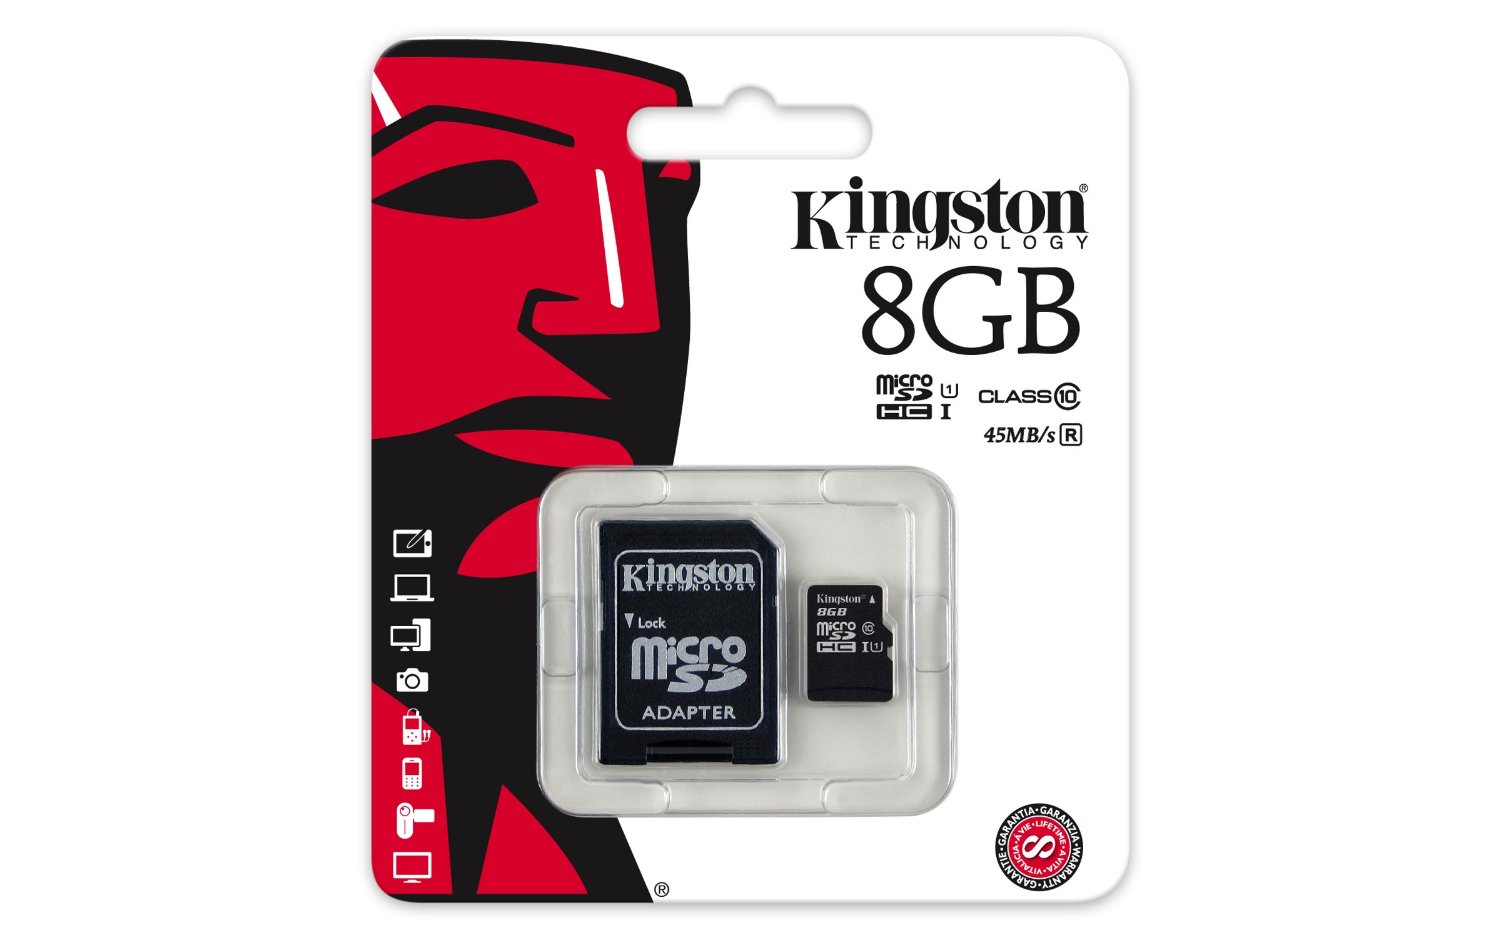 Kingston Digital 8GB microSDHC Class 10 UHS-I 45MB/s Read Card with SD Adapter 